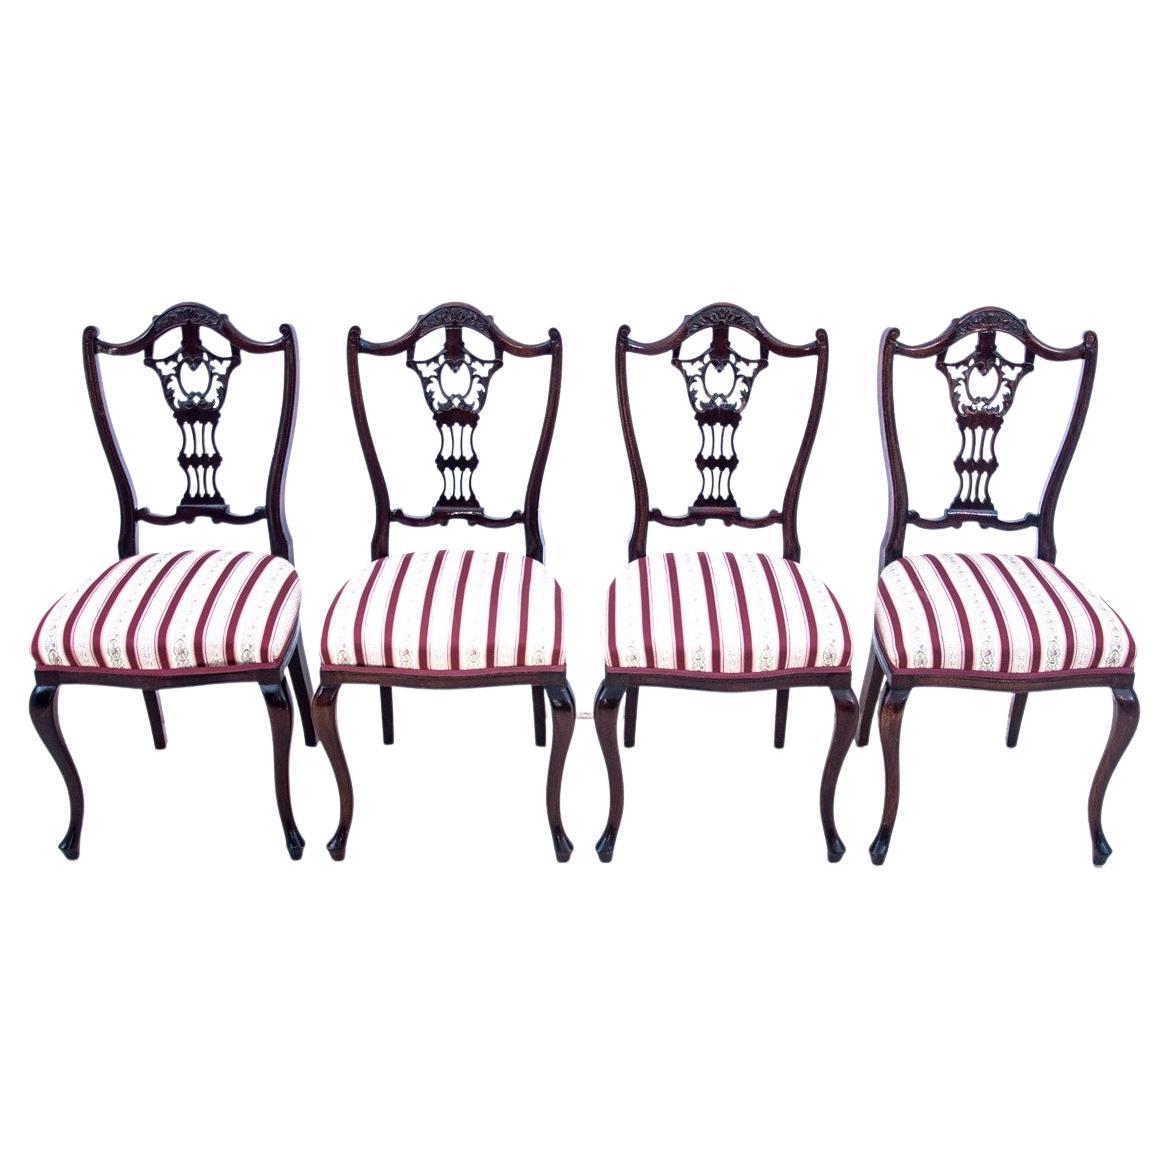 Four dining chairs, Northern Europe, circa 1880.